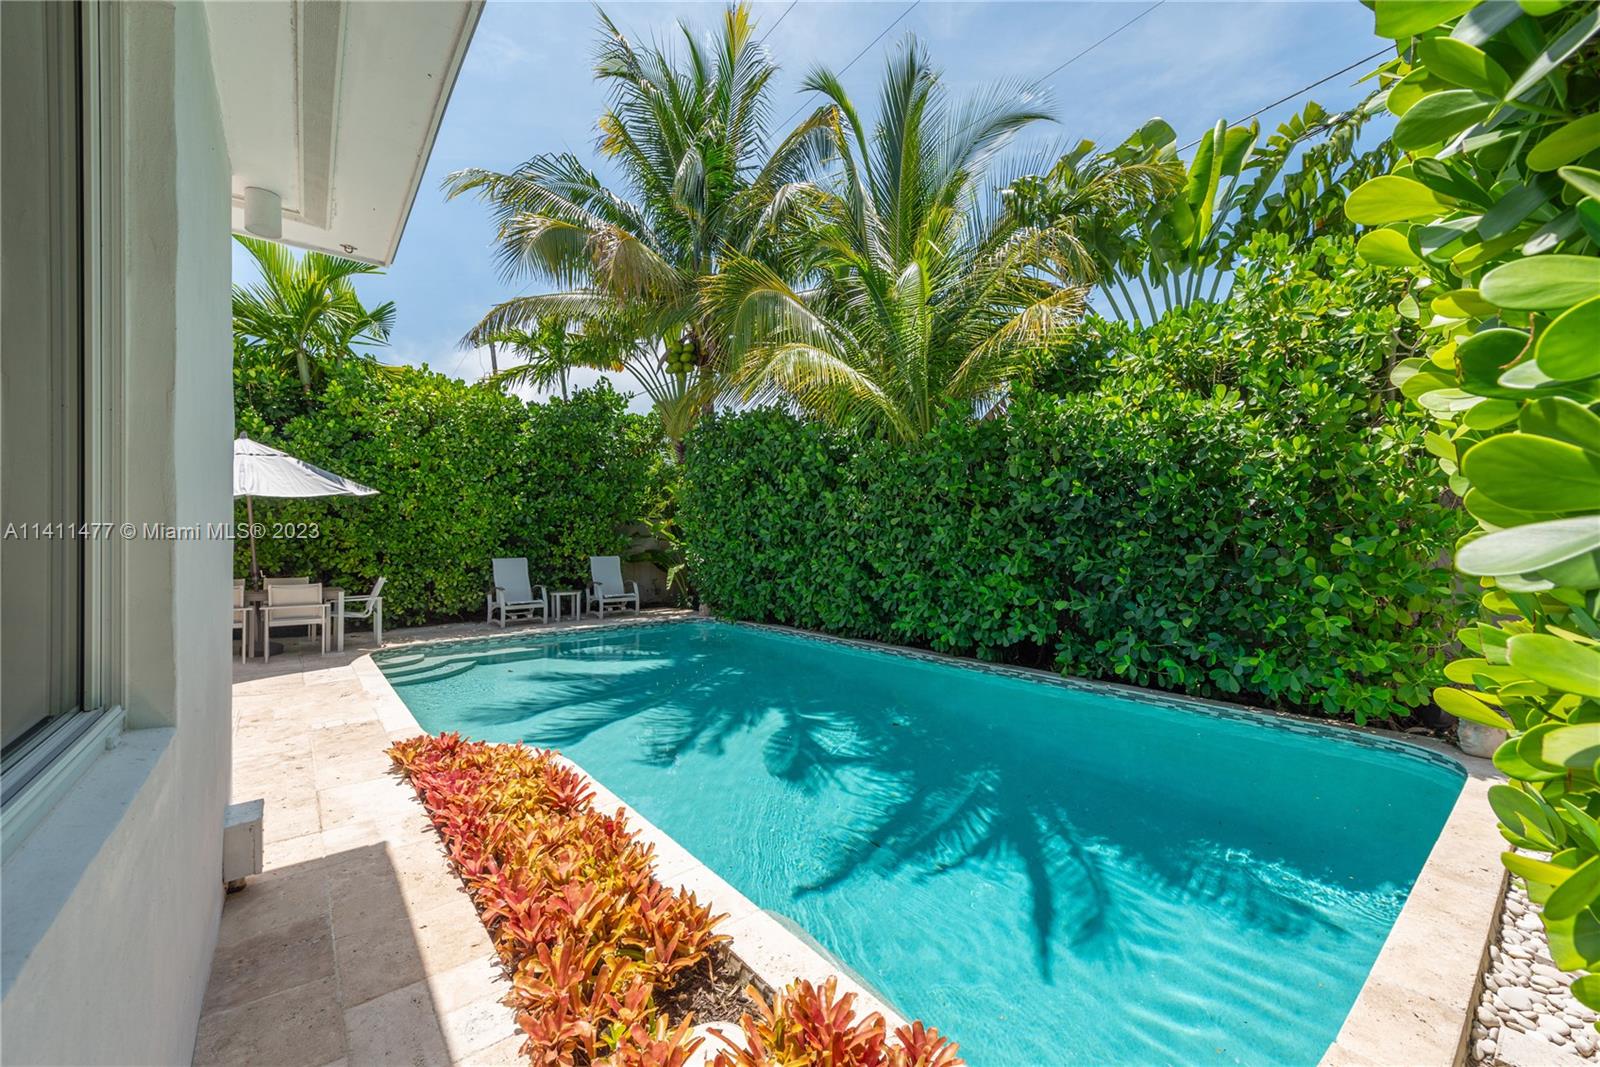 Property for Sale at 590 W 49th St, Miami Beach, Miami-Dade County, Florida - Bedrooms: 4 
Bathrooms: 3  - $2,450,000